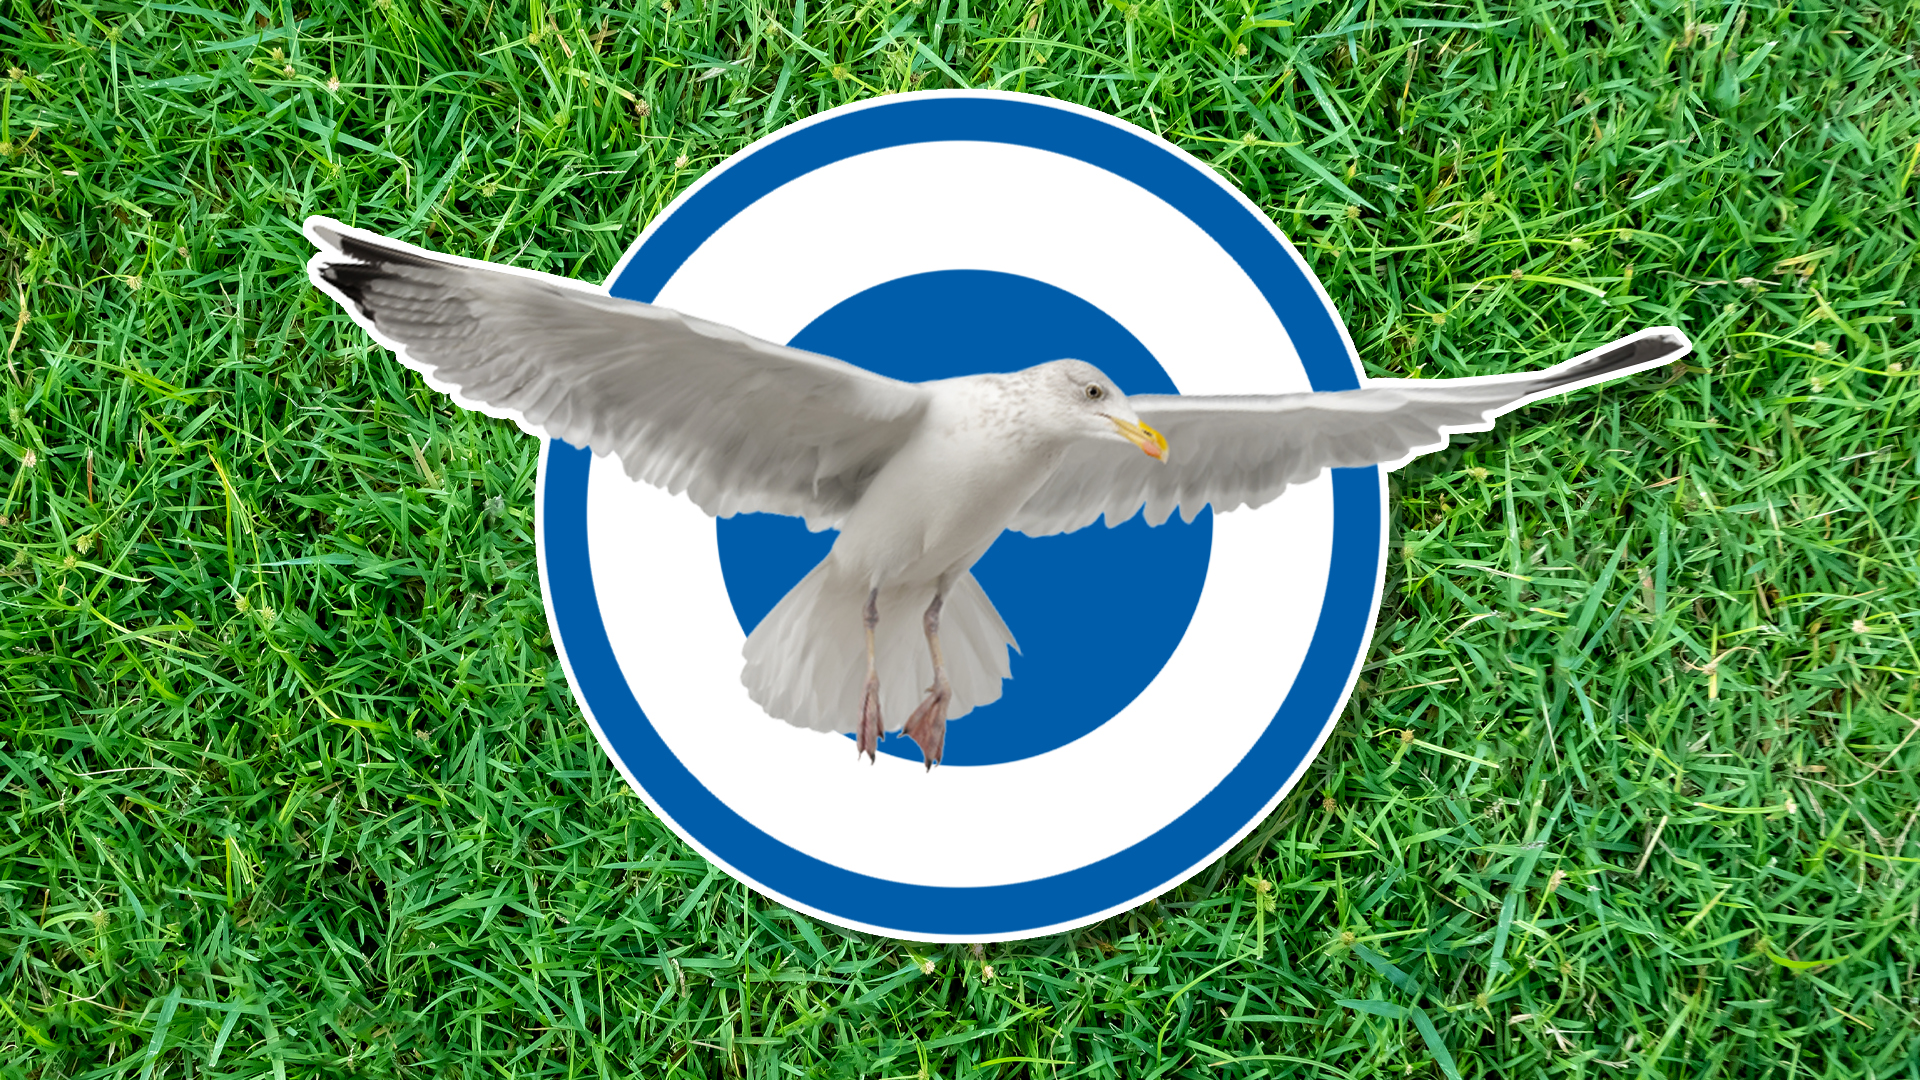 A seagull on a blue and white circle